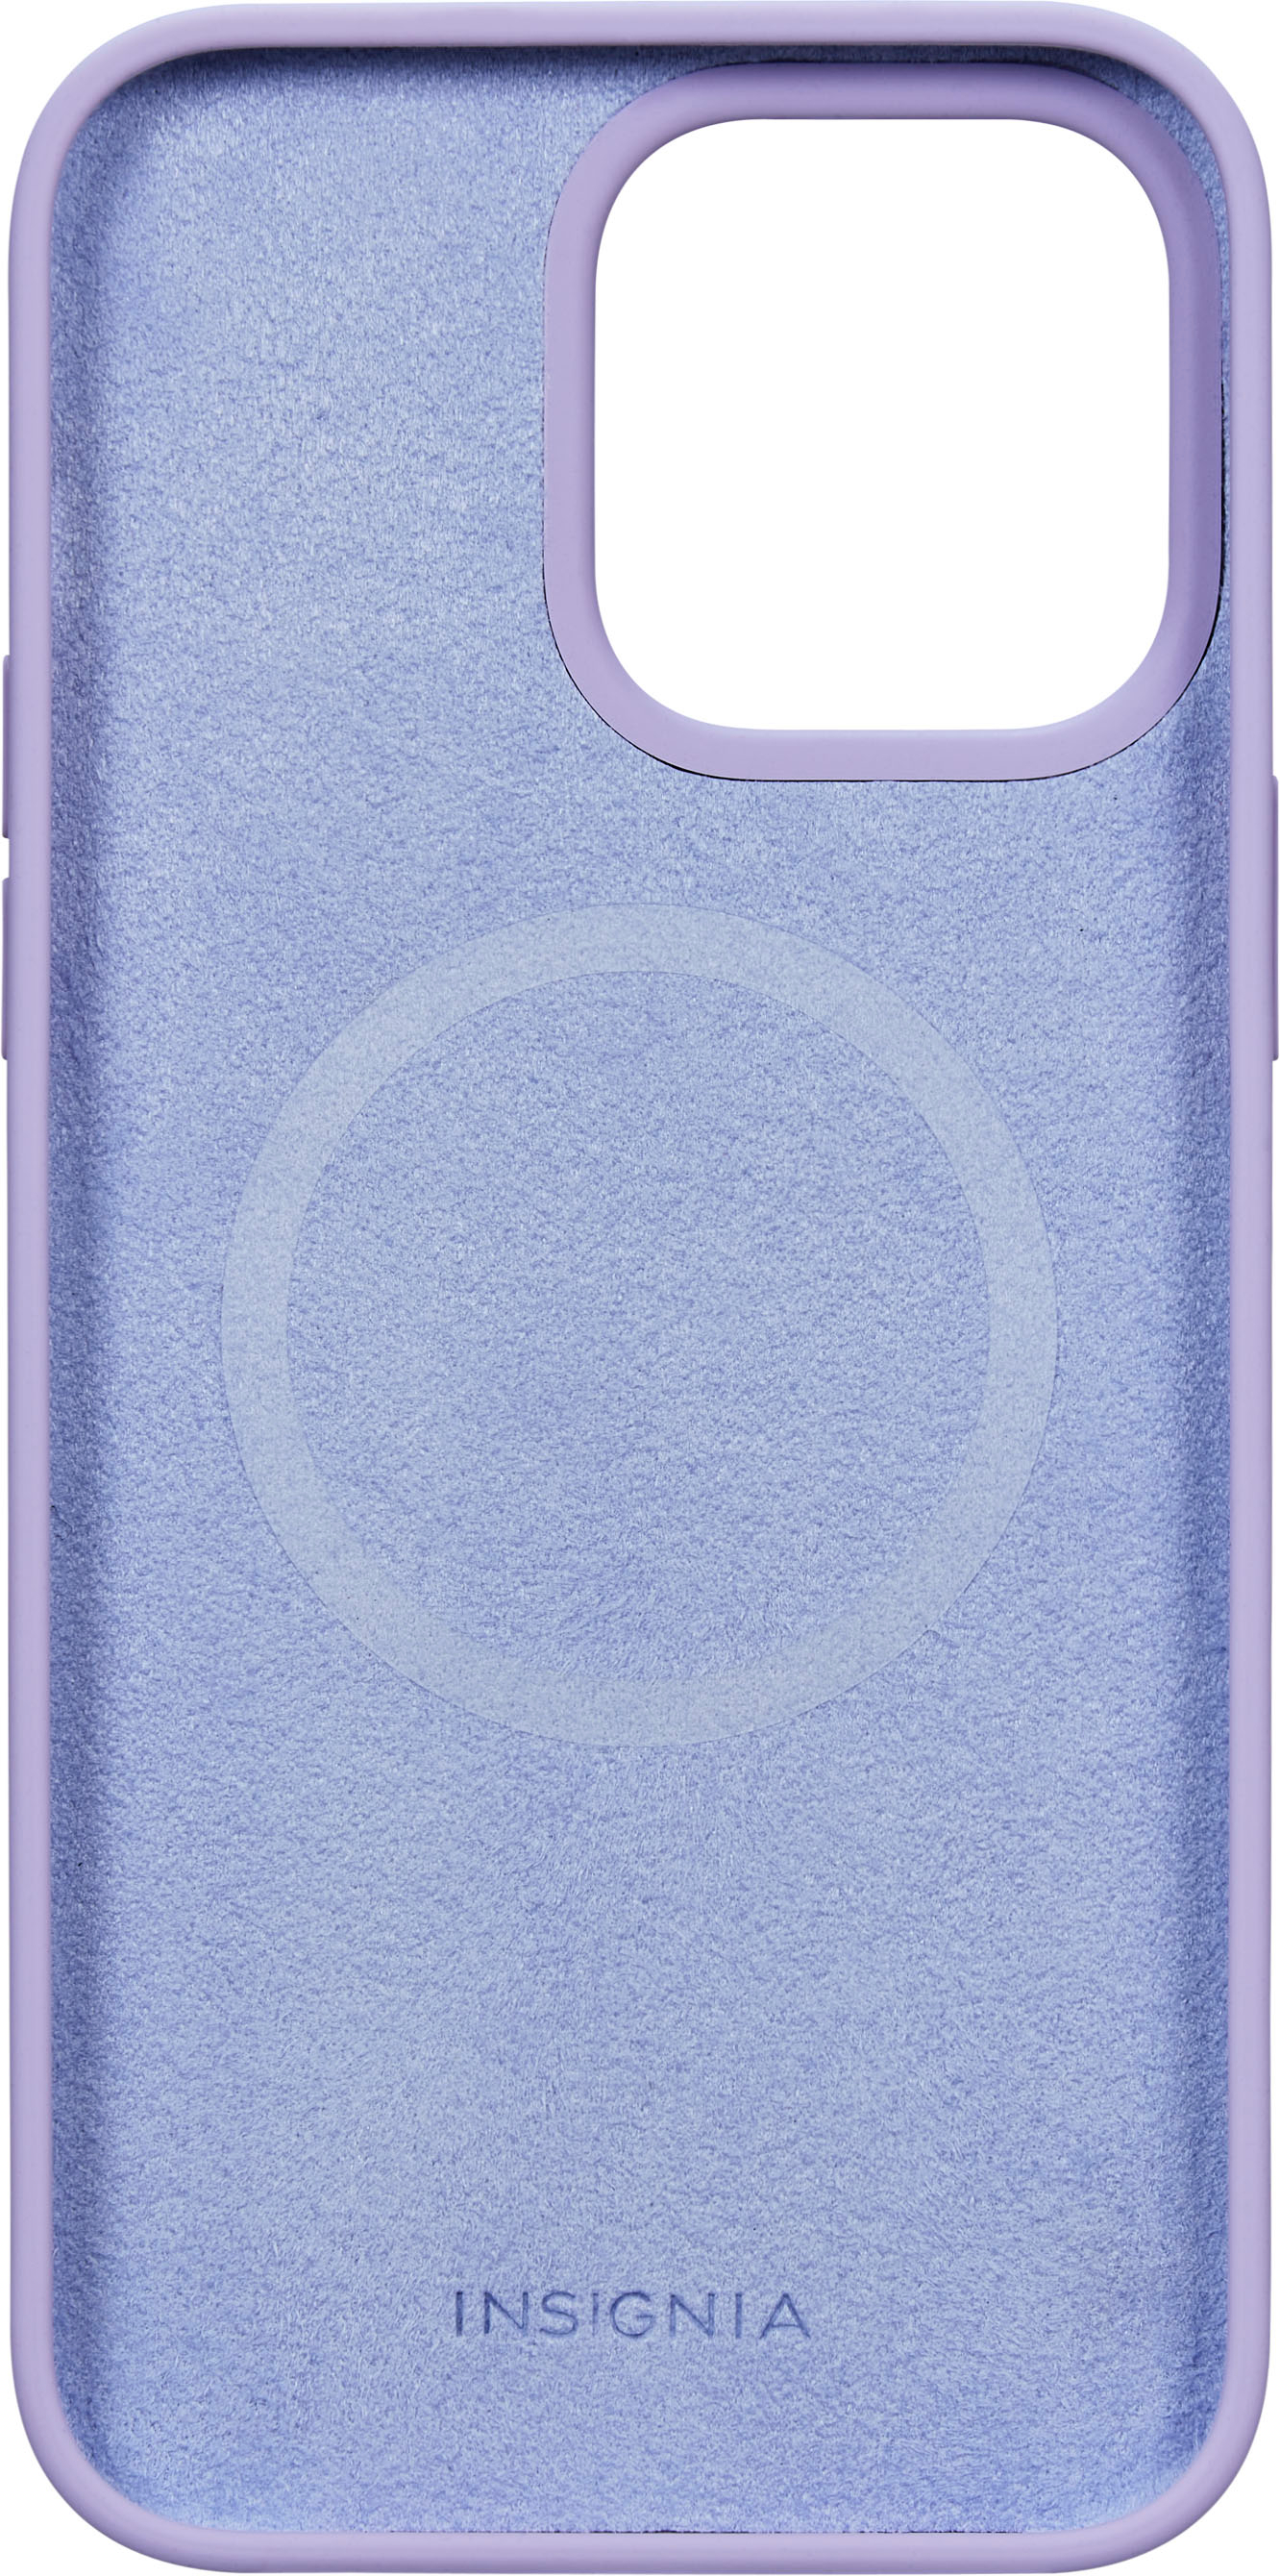 Best Buy: Insignia™ Silicone Hard Shell Case for Apple® iPhone® 11 Pro Max  Lavender NS-MAXILLSPR